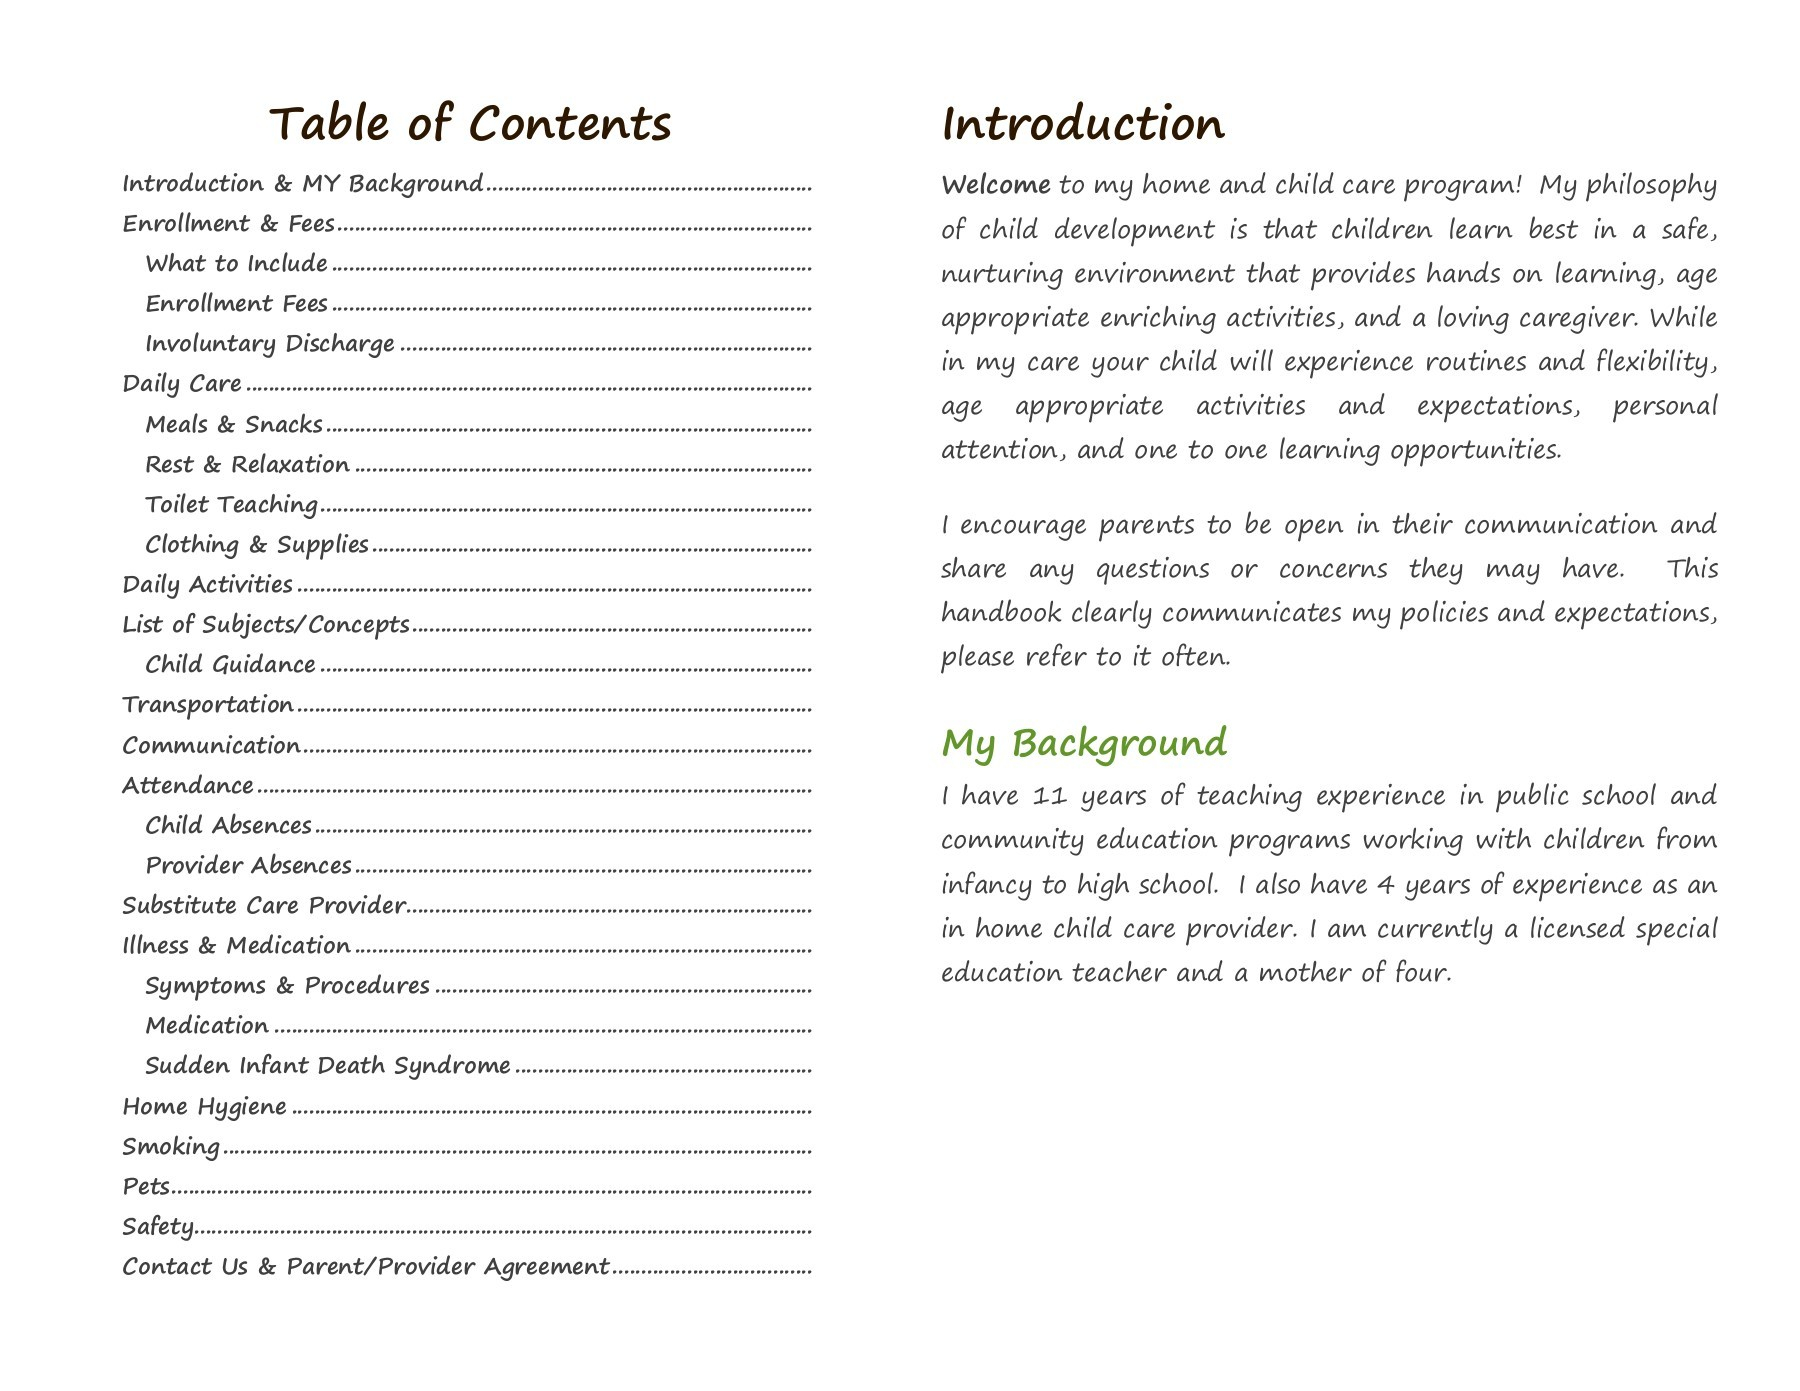 Parent Child Care Provider Agreement Second Home Child Care Policy Handbook 2015 2016 Pages 1 18